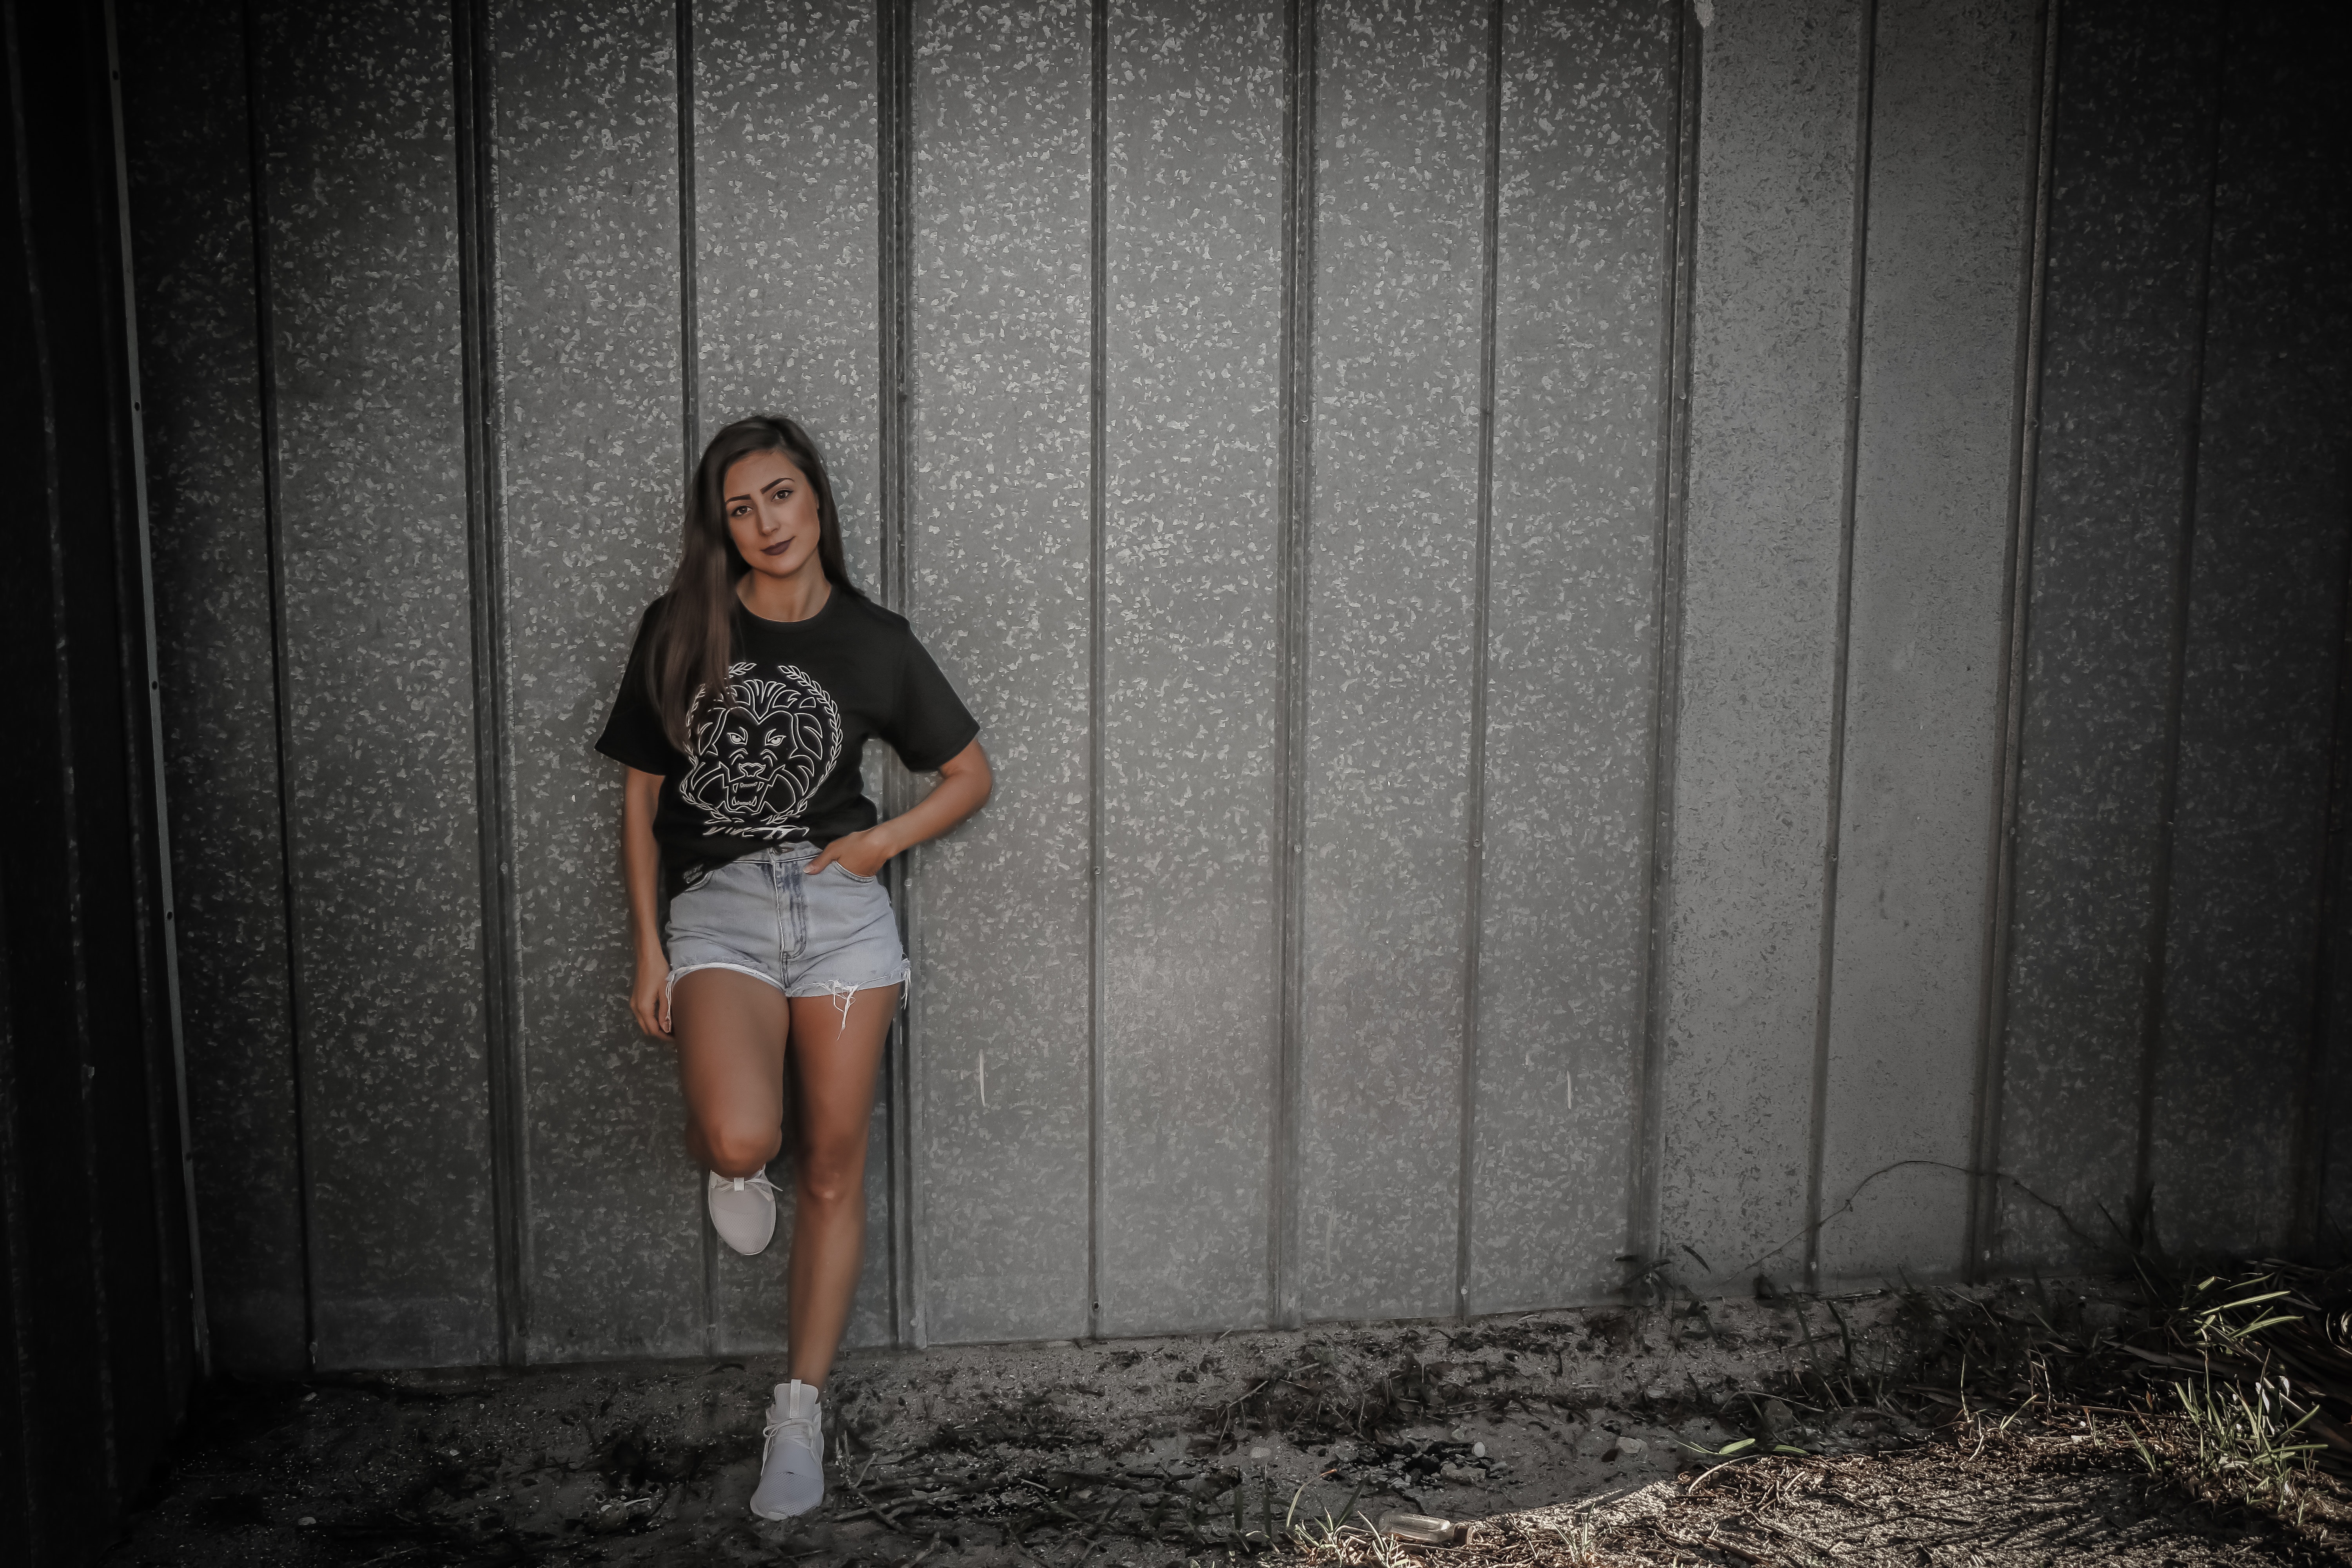 Woman wearing black shirt and daisy dukes leaning on wall photo